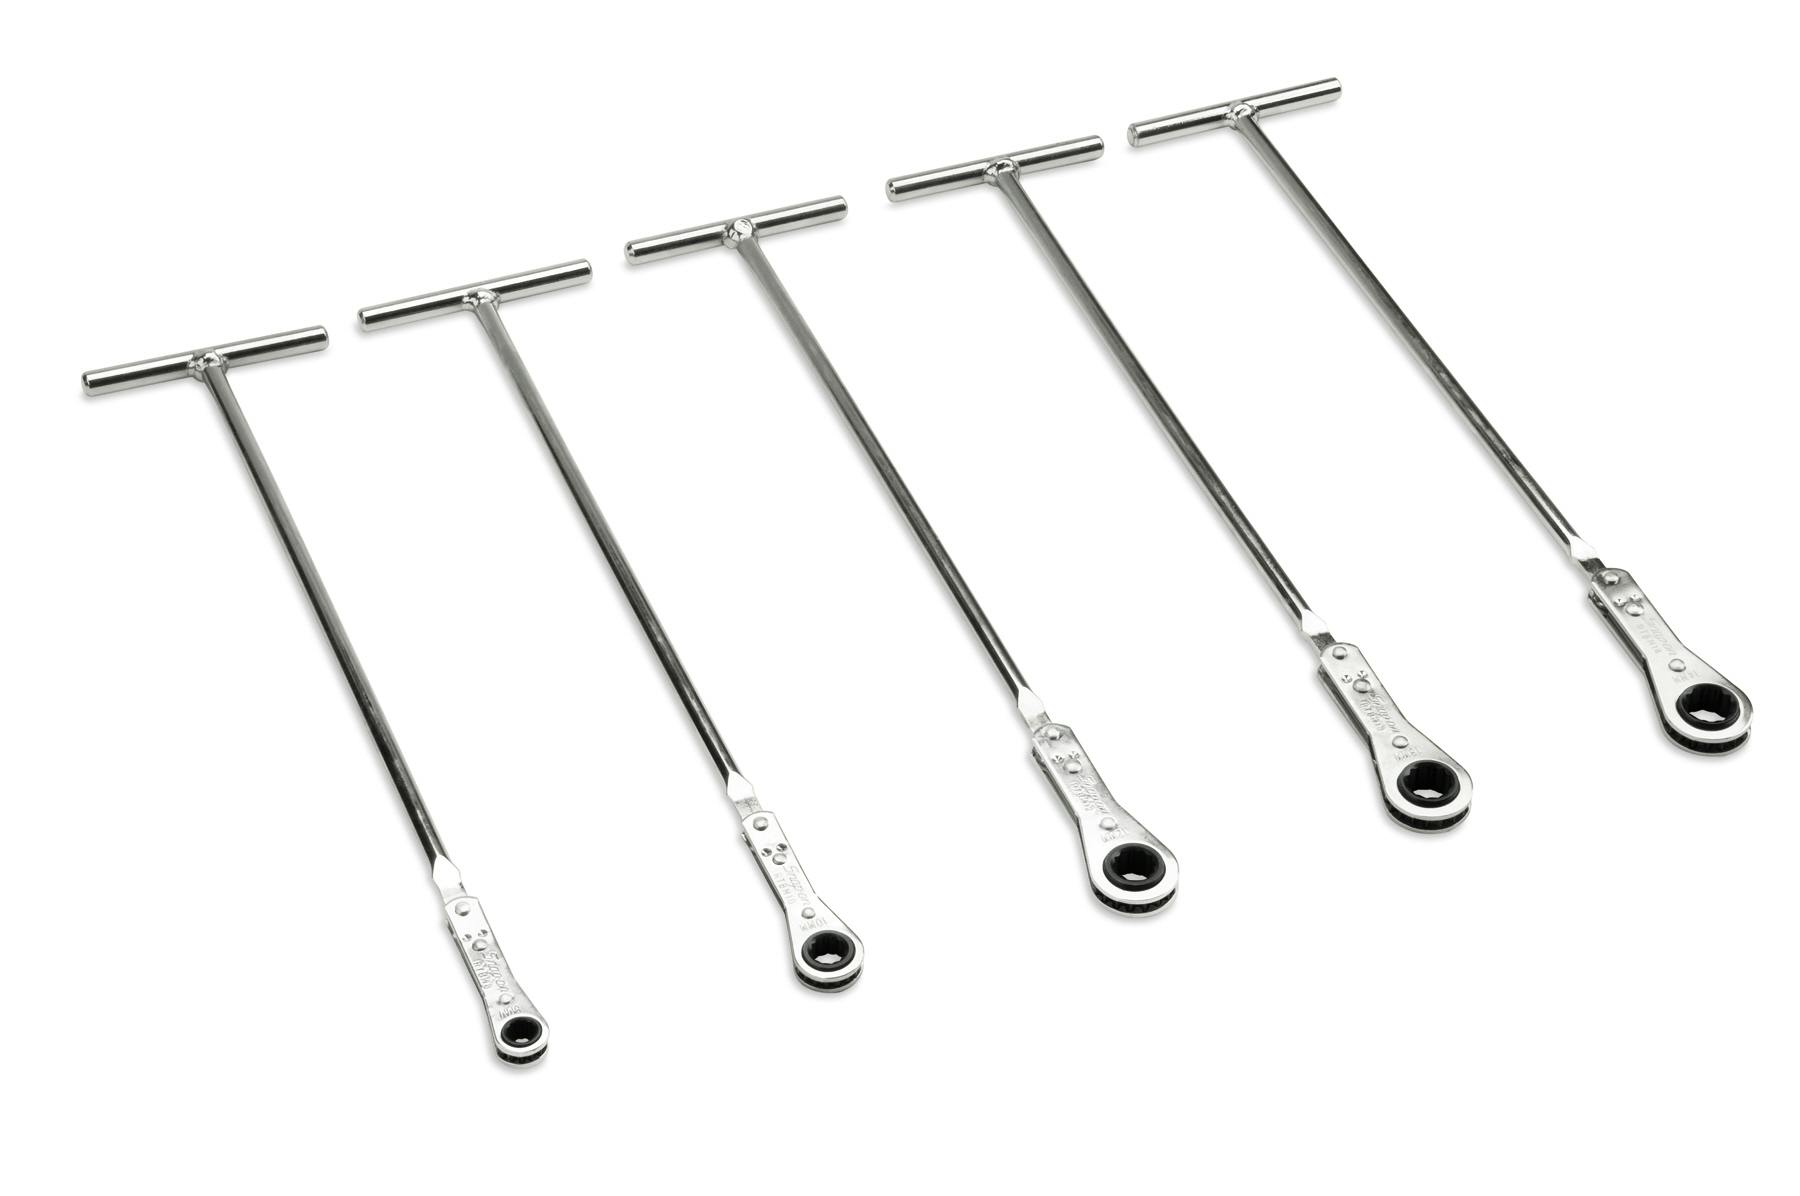 5 pc 12-Point Metric T-Handle Ratcheting Box Wrench Set (8-14 mm)